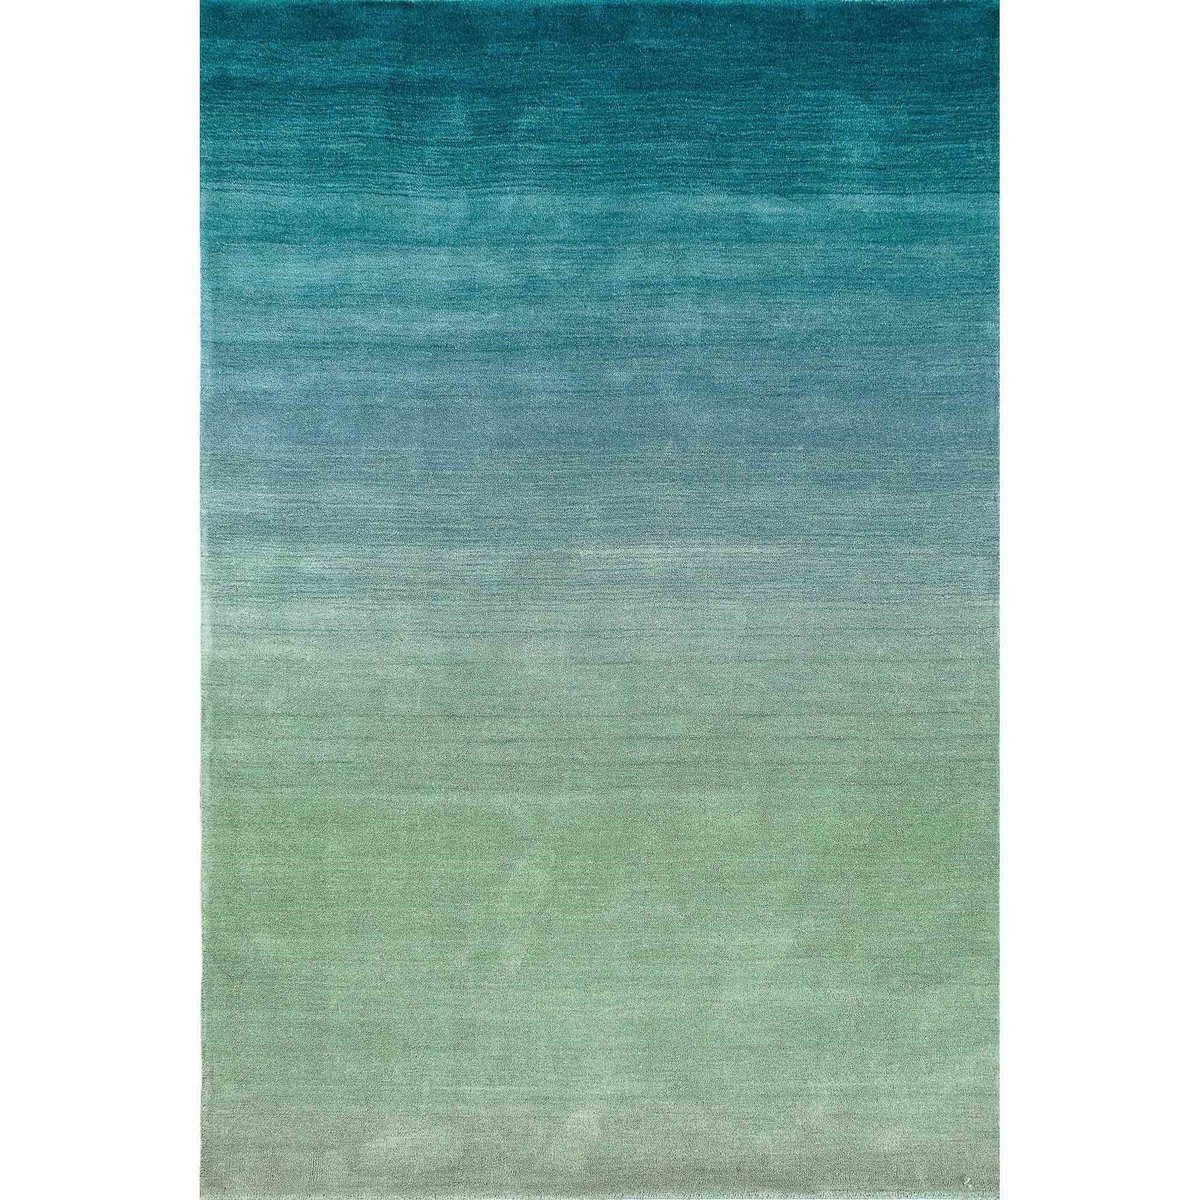 Liora Manne Arca Ombre Rugs Direct, Teal Ombre Area Rugs